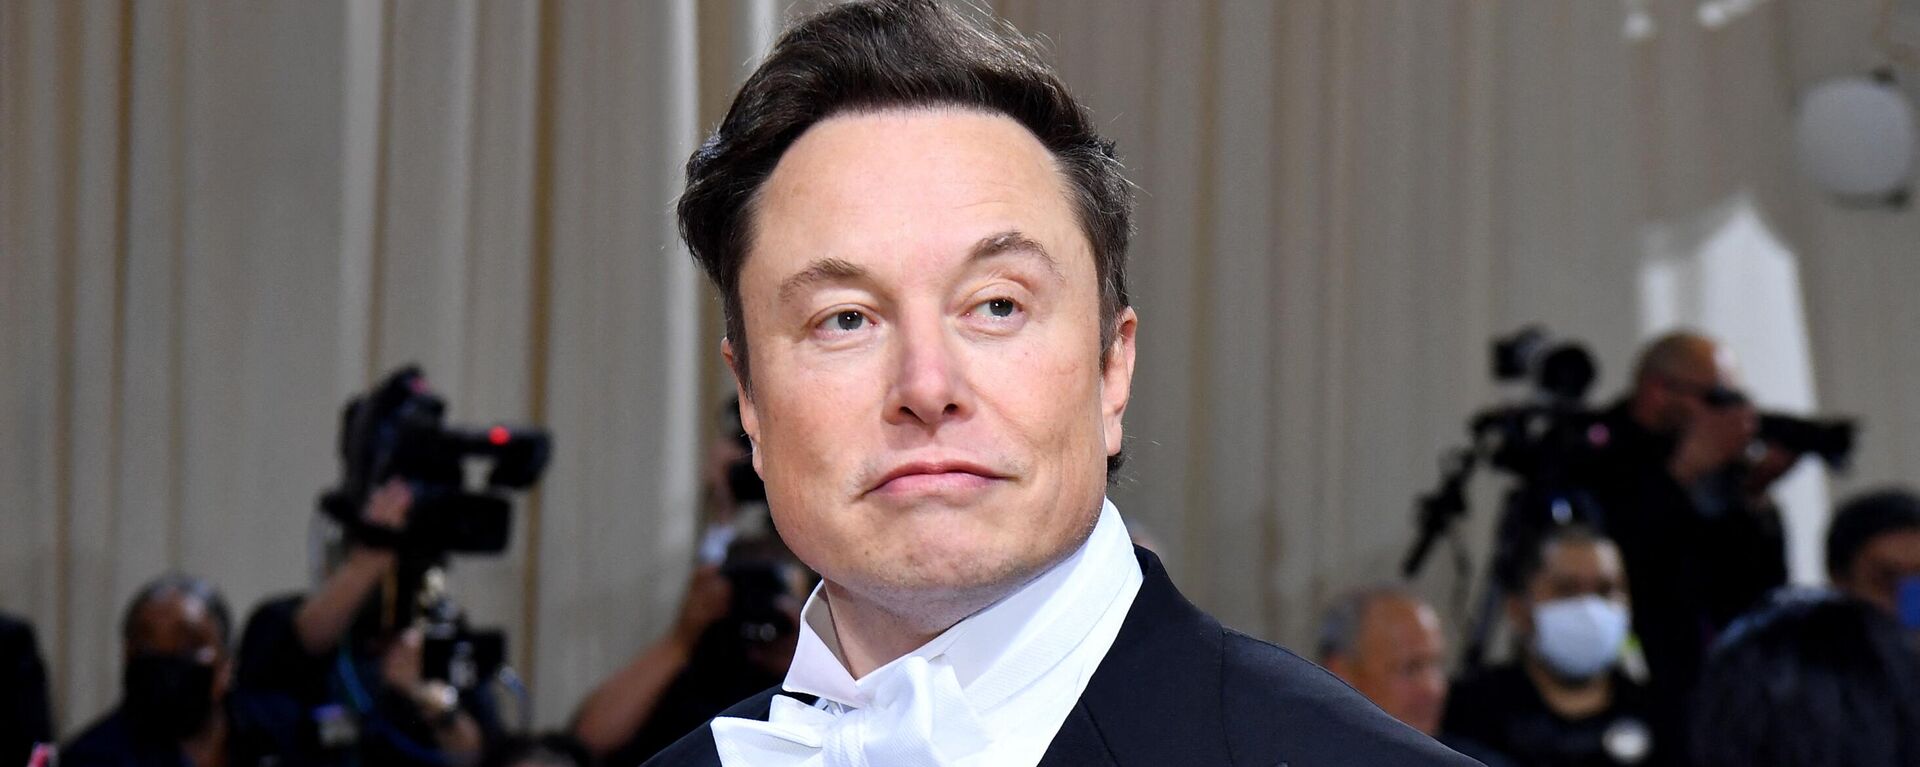 CEO, and chief engineer at SpaceX, Elon Musk, arrives for the 2022 Met Gala at the Metropolitan Museum of Art on May 2, 2022, in New York. - Sputnik International, 1920, 14.12.2022